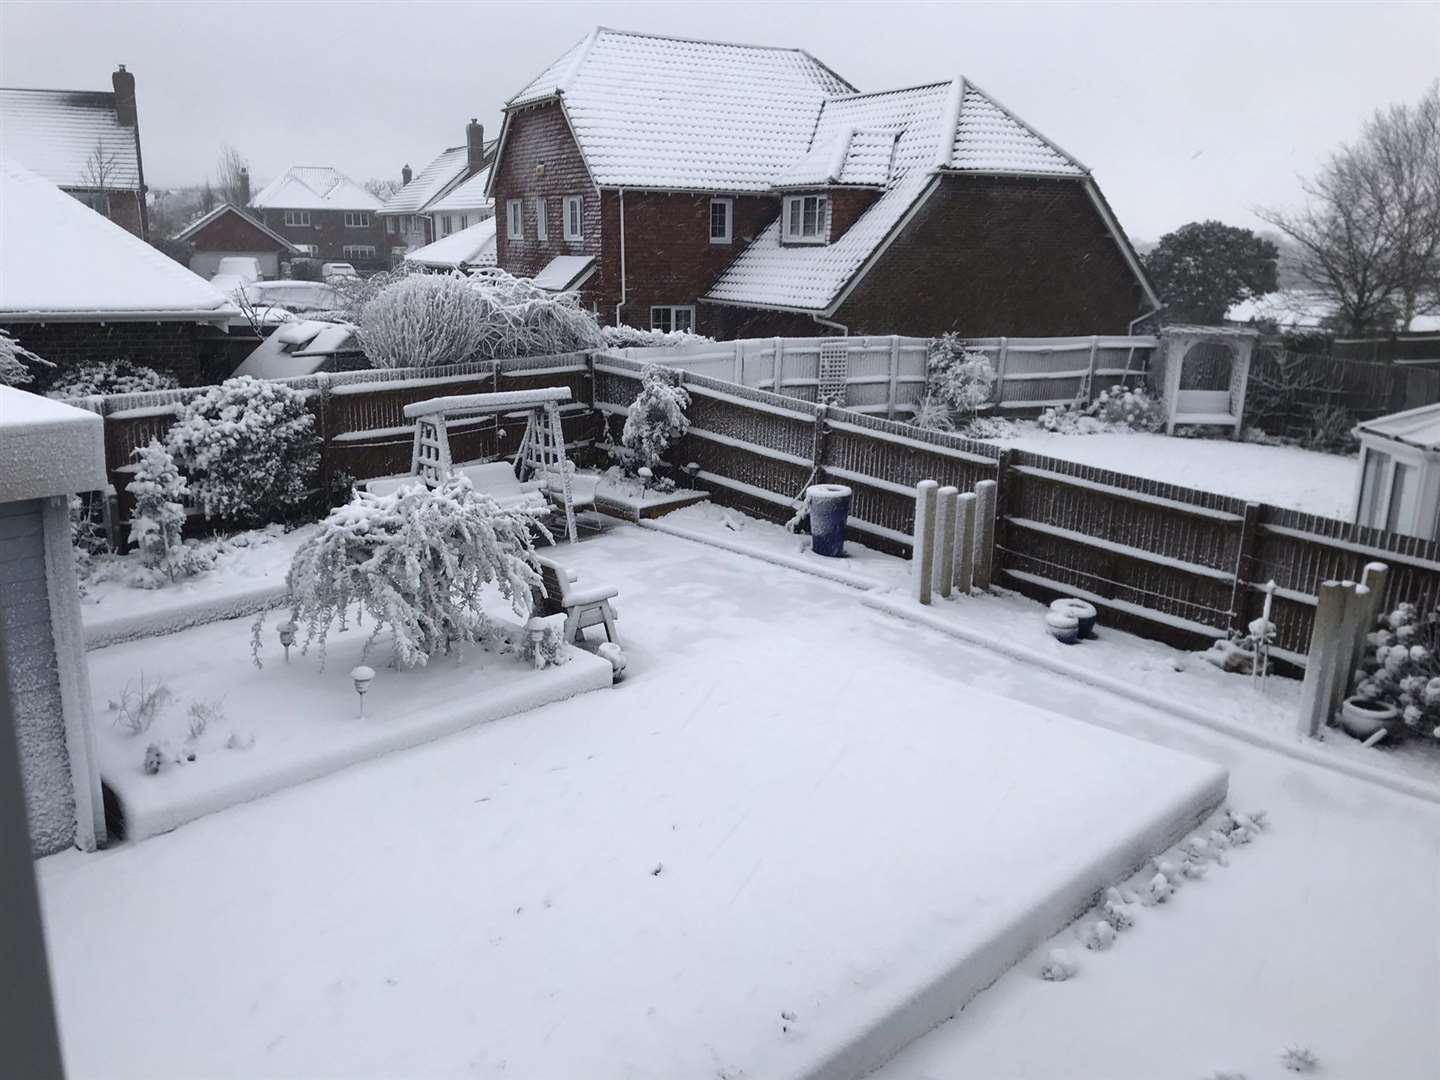 A thick layer of snow in Hawkinge captured by @melbayliss36